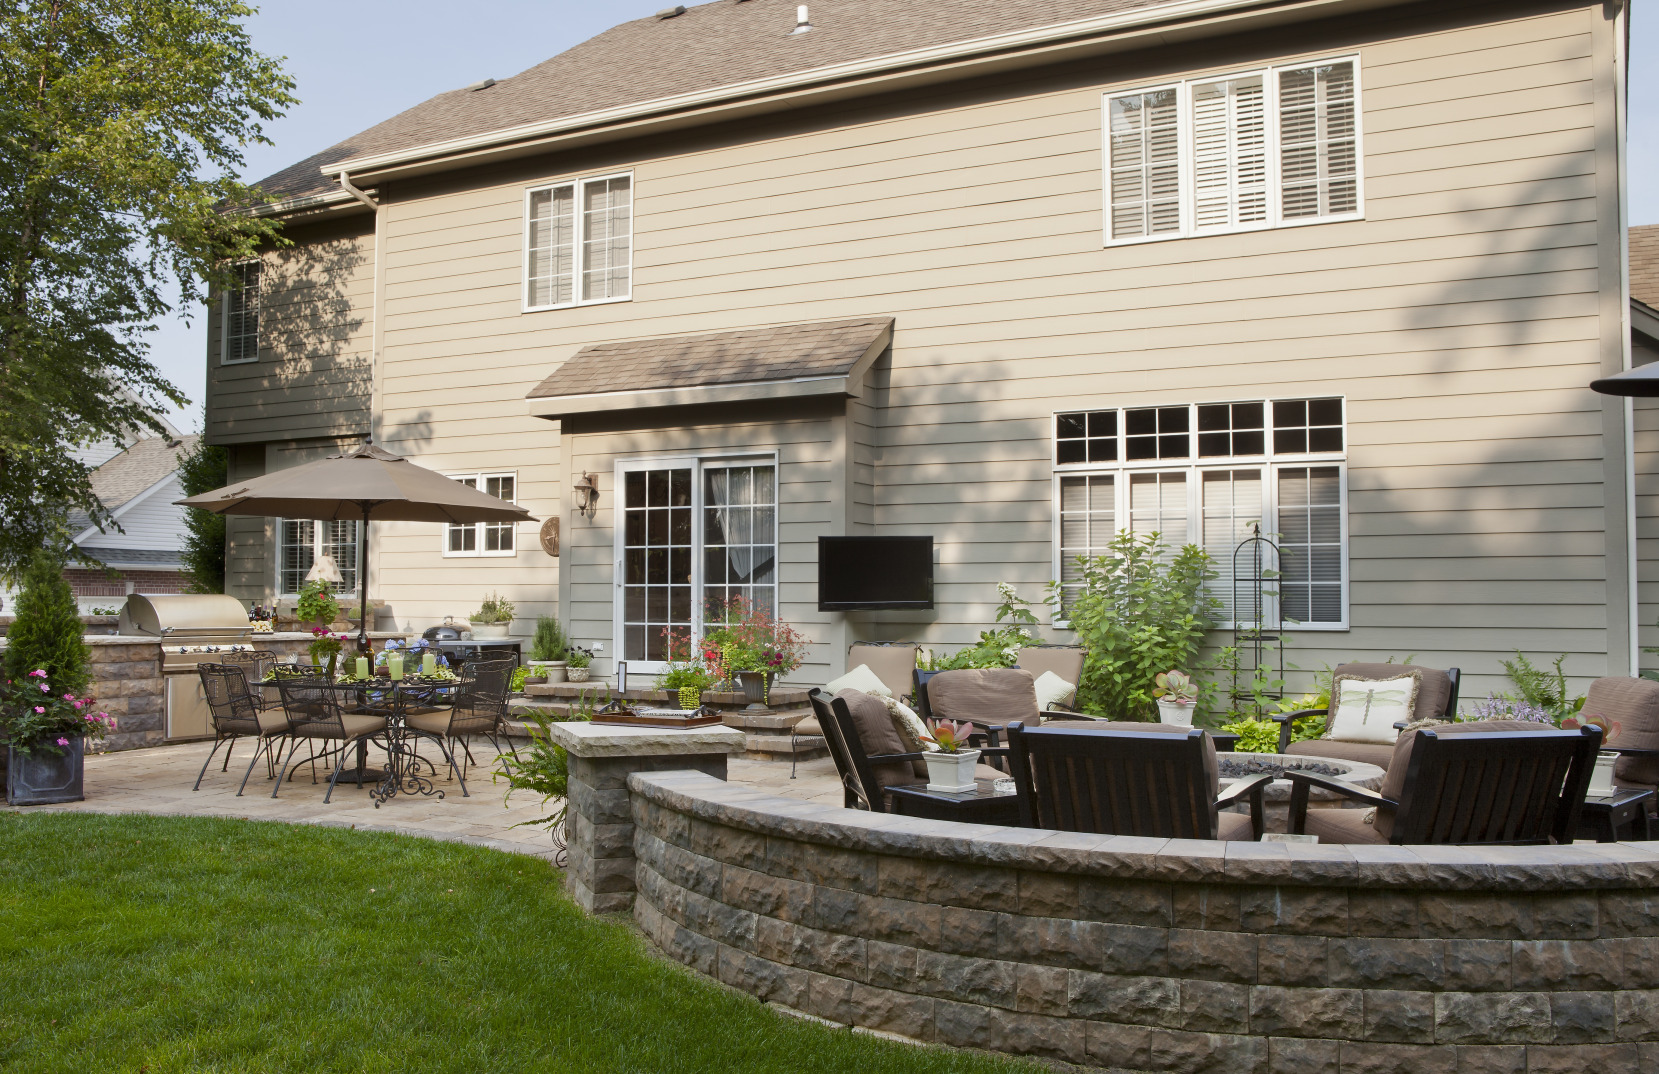  A new home construction with two seating areas on a stone patio.